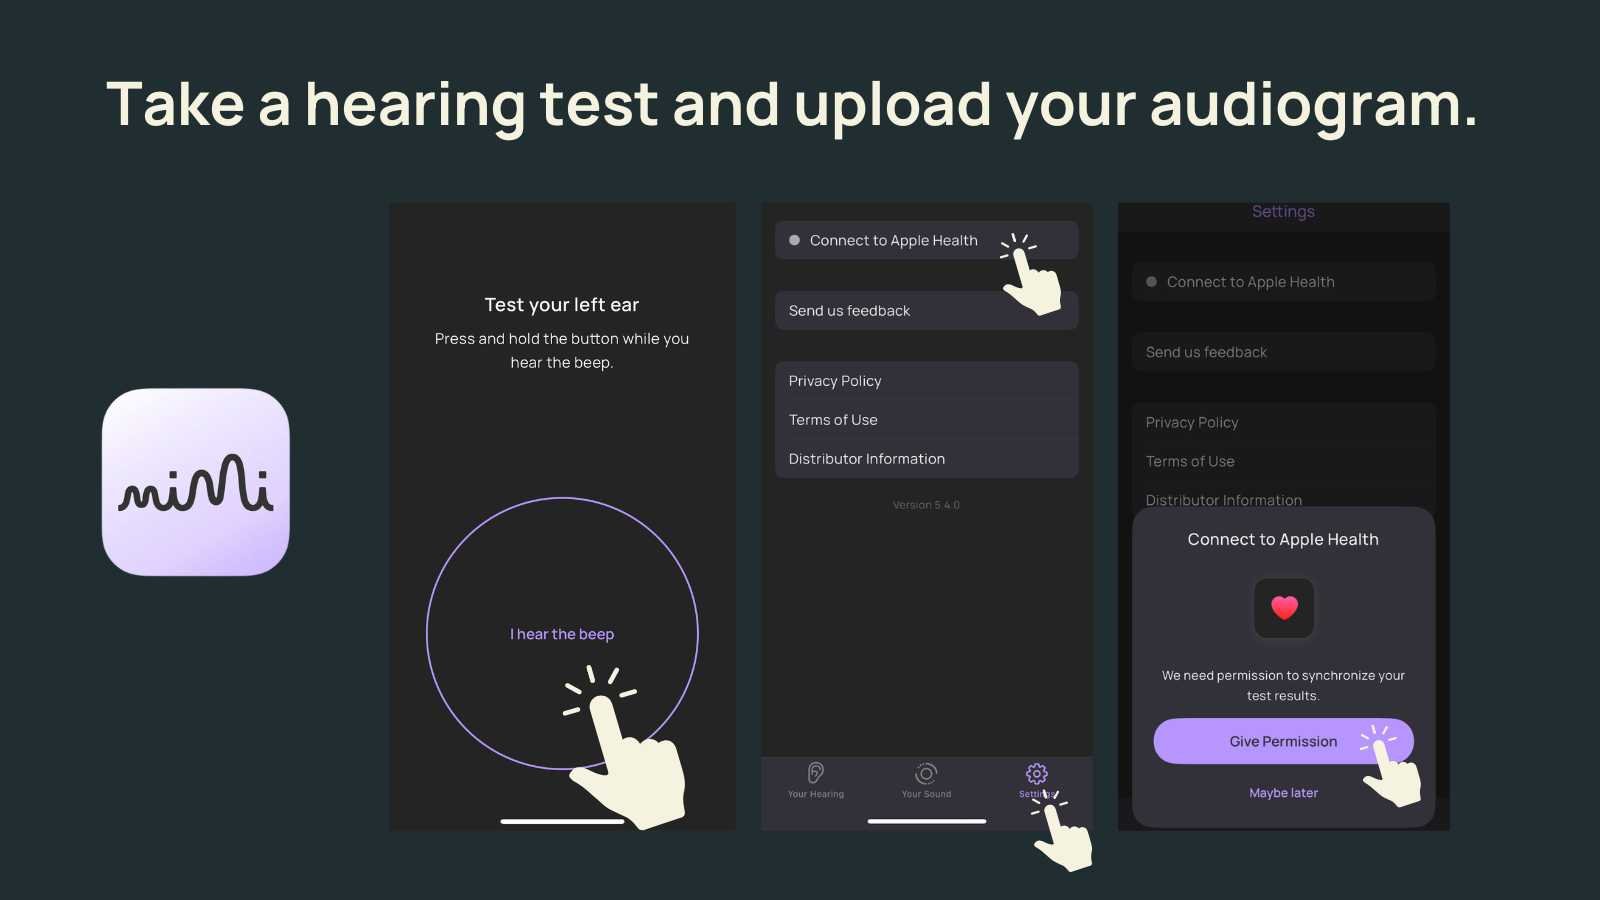 Tutorial on how to upload an audiogram to Apple Health